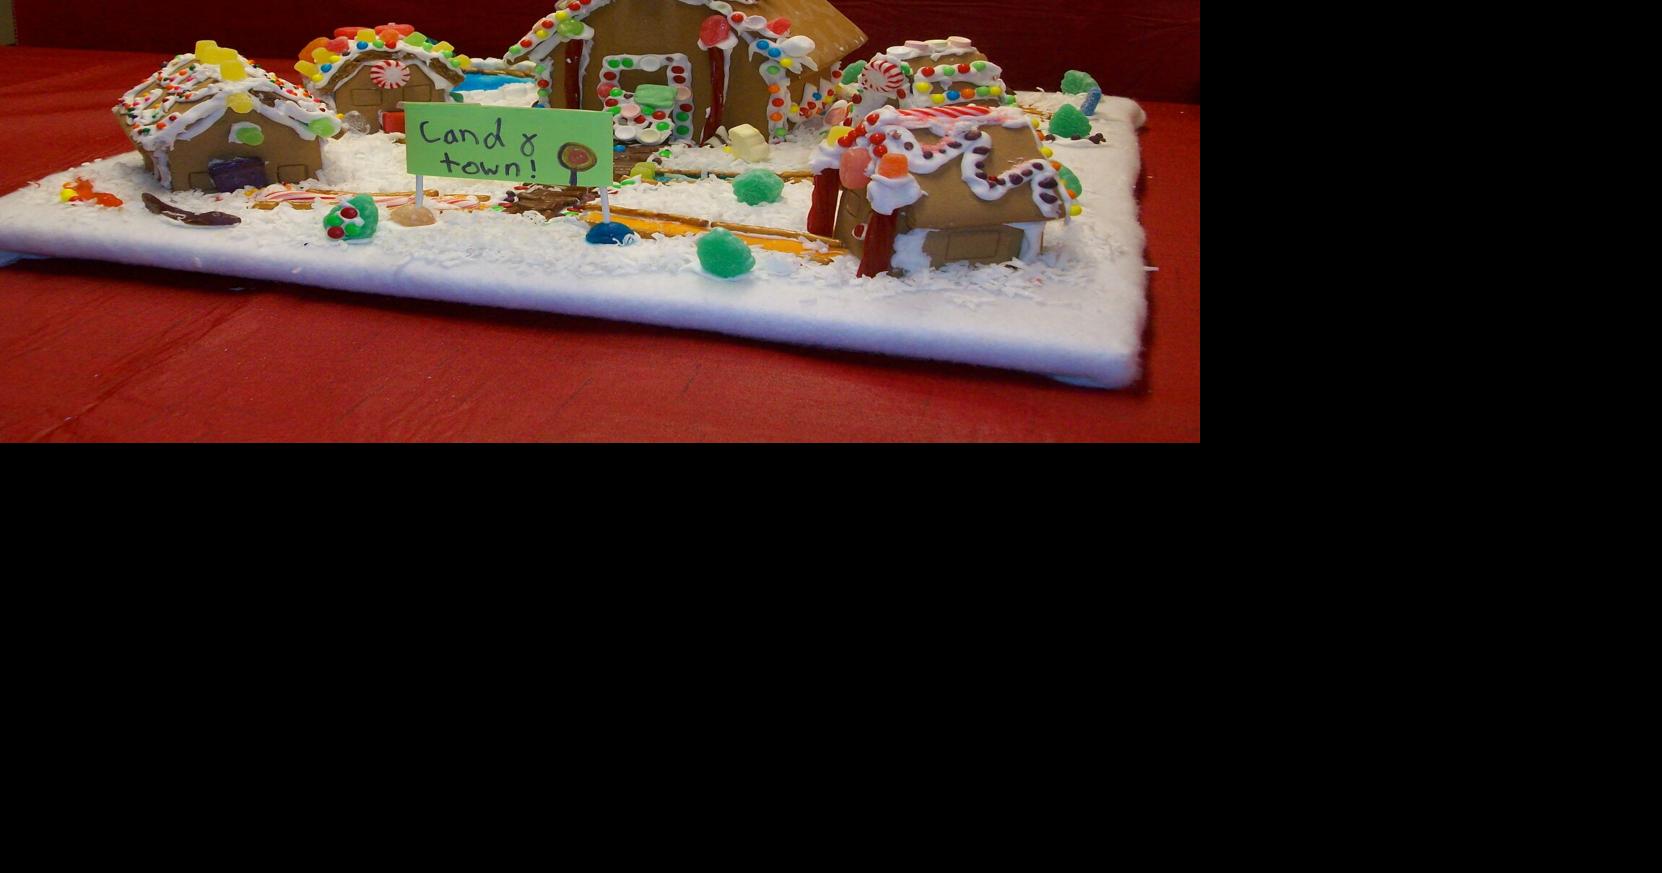 This was the most humbling Cocoa Stand gingerbread house, & it was mis, ginger bread house